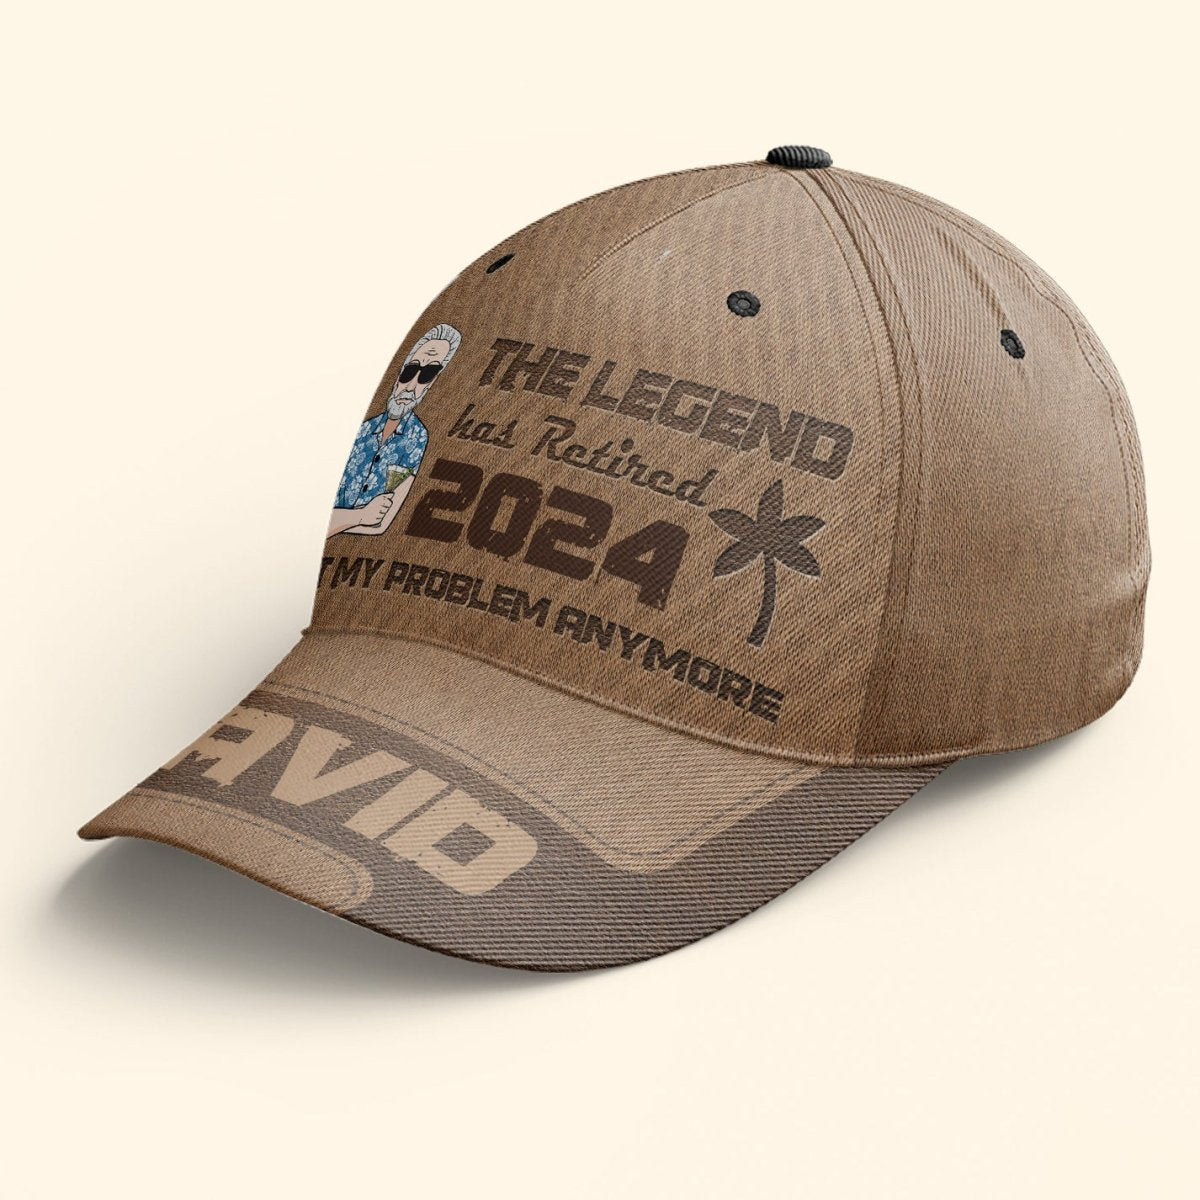 Family - The Legend Has Retired Not My Problem Anymore - Personalized Classic Cap (LH) - The Next Custom Gift